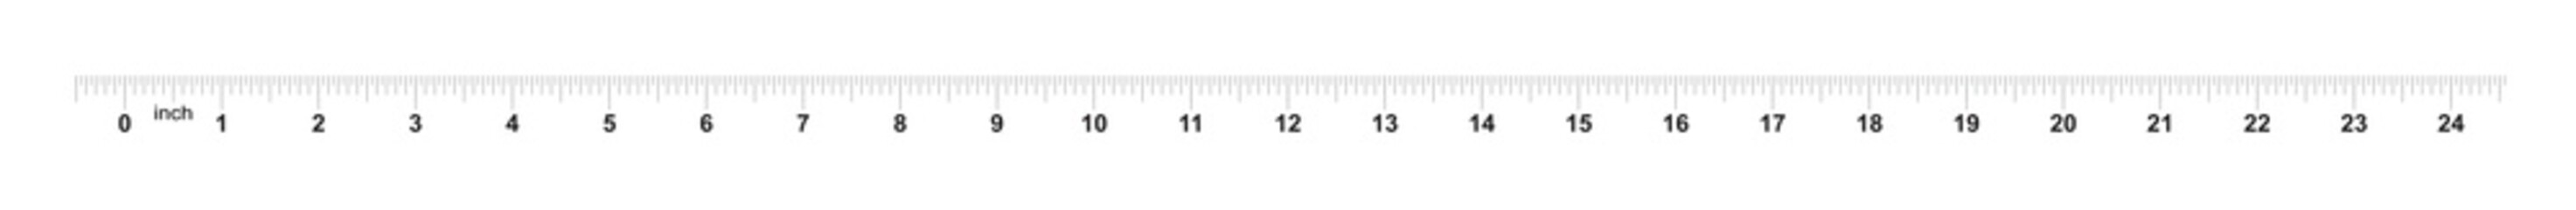 Ruler 24 inches. Metric inch size indicator. Decimal system grid. Measuring tool